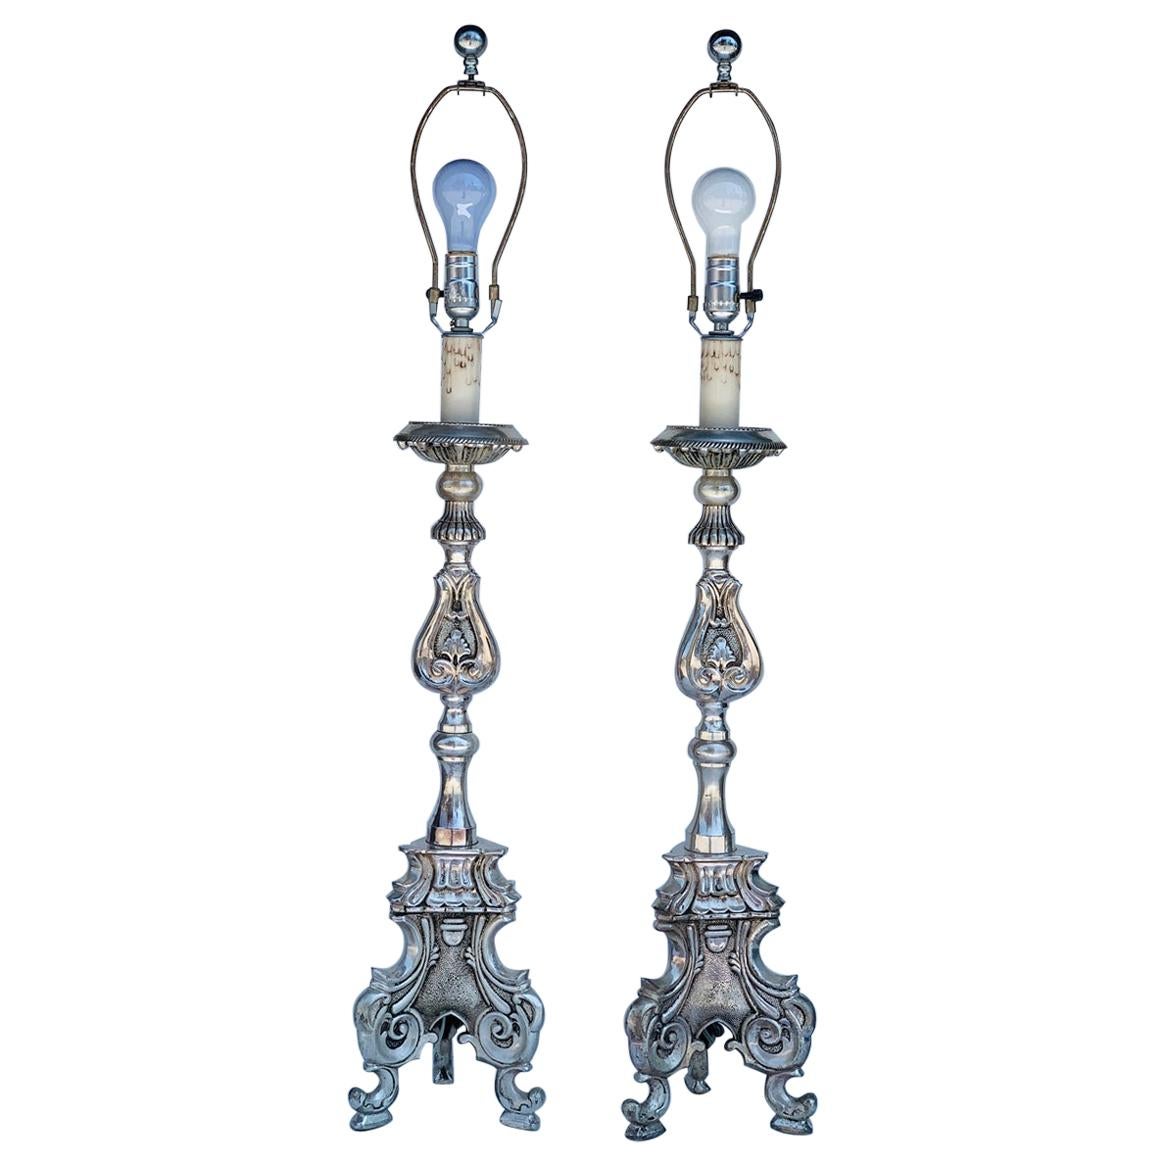 Stunning Silver Plated Table Lamps For Sale